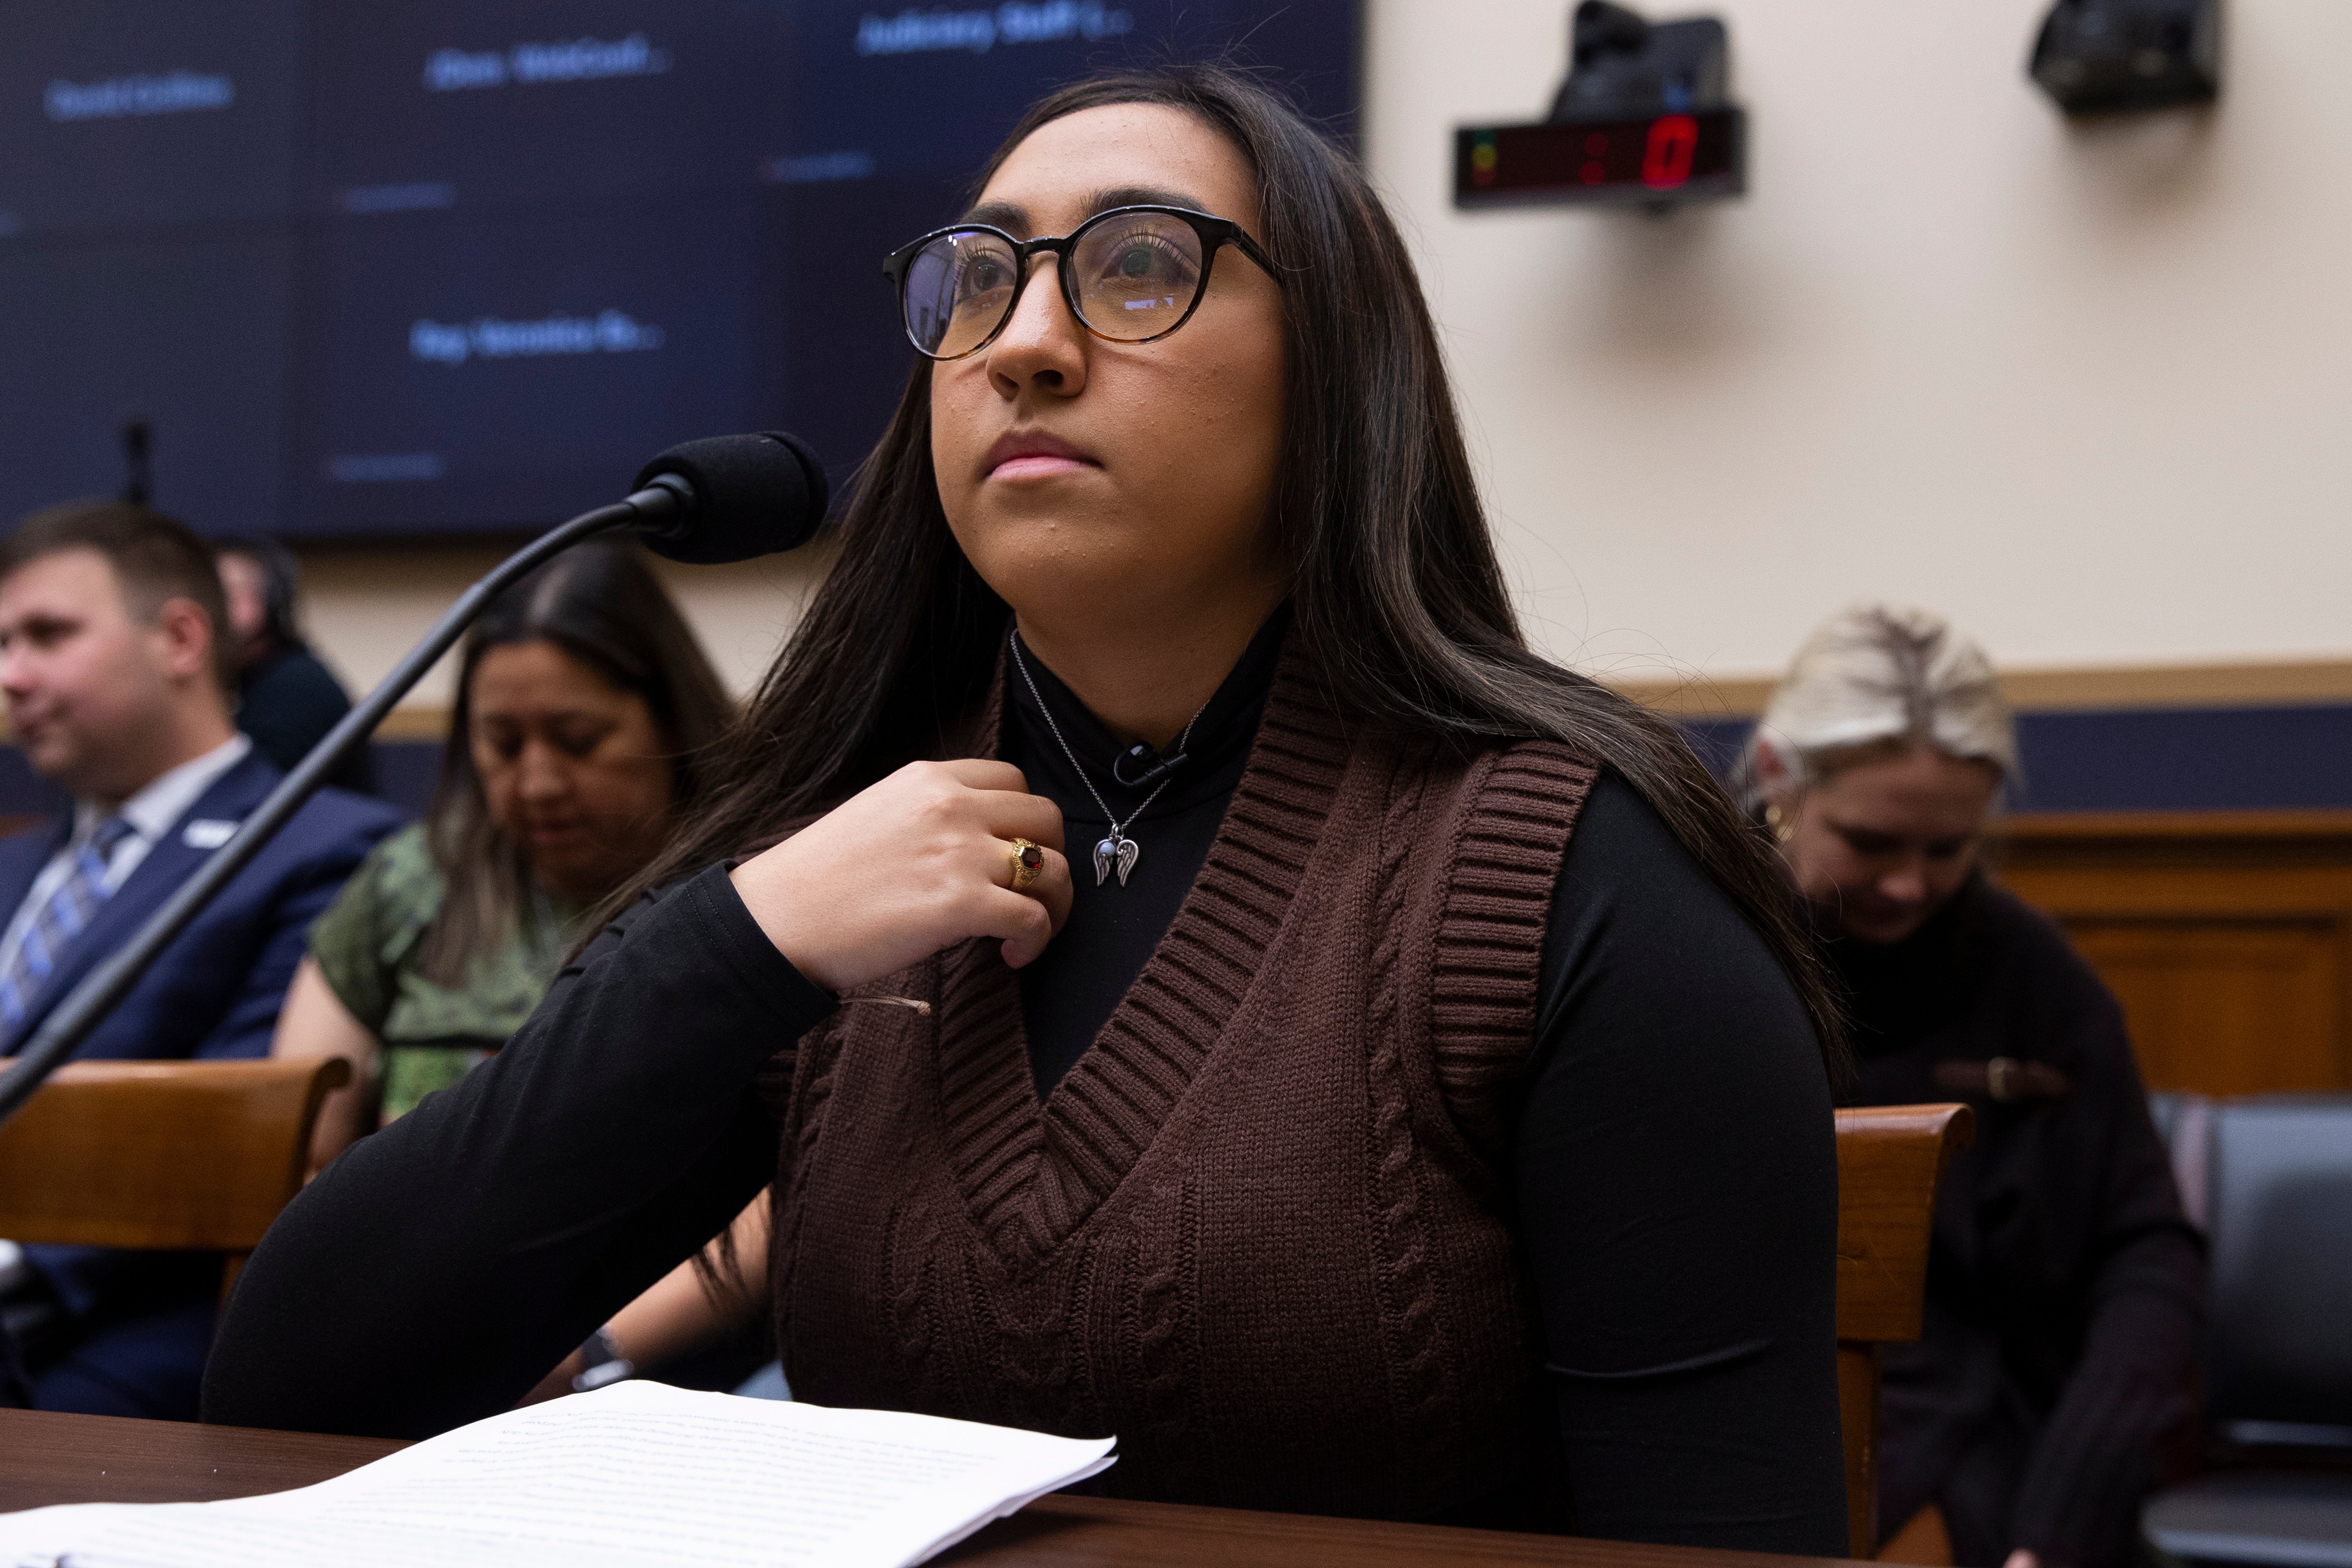 Faith Mata, whose 10-year-old sister was killed in the Robb Elementary School mass shooting, testifies to the House Judiciary Committee on 15 December